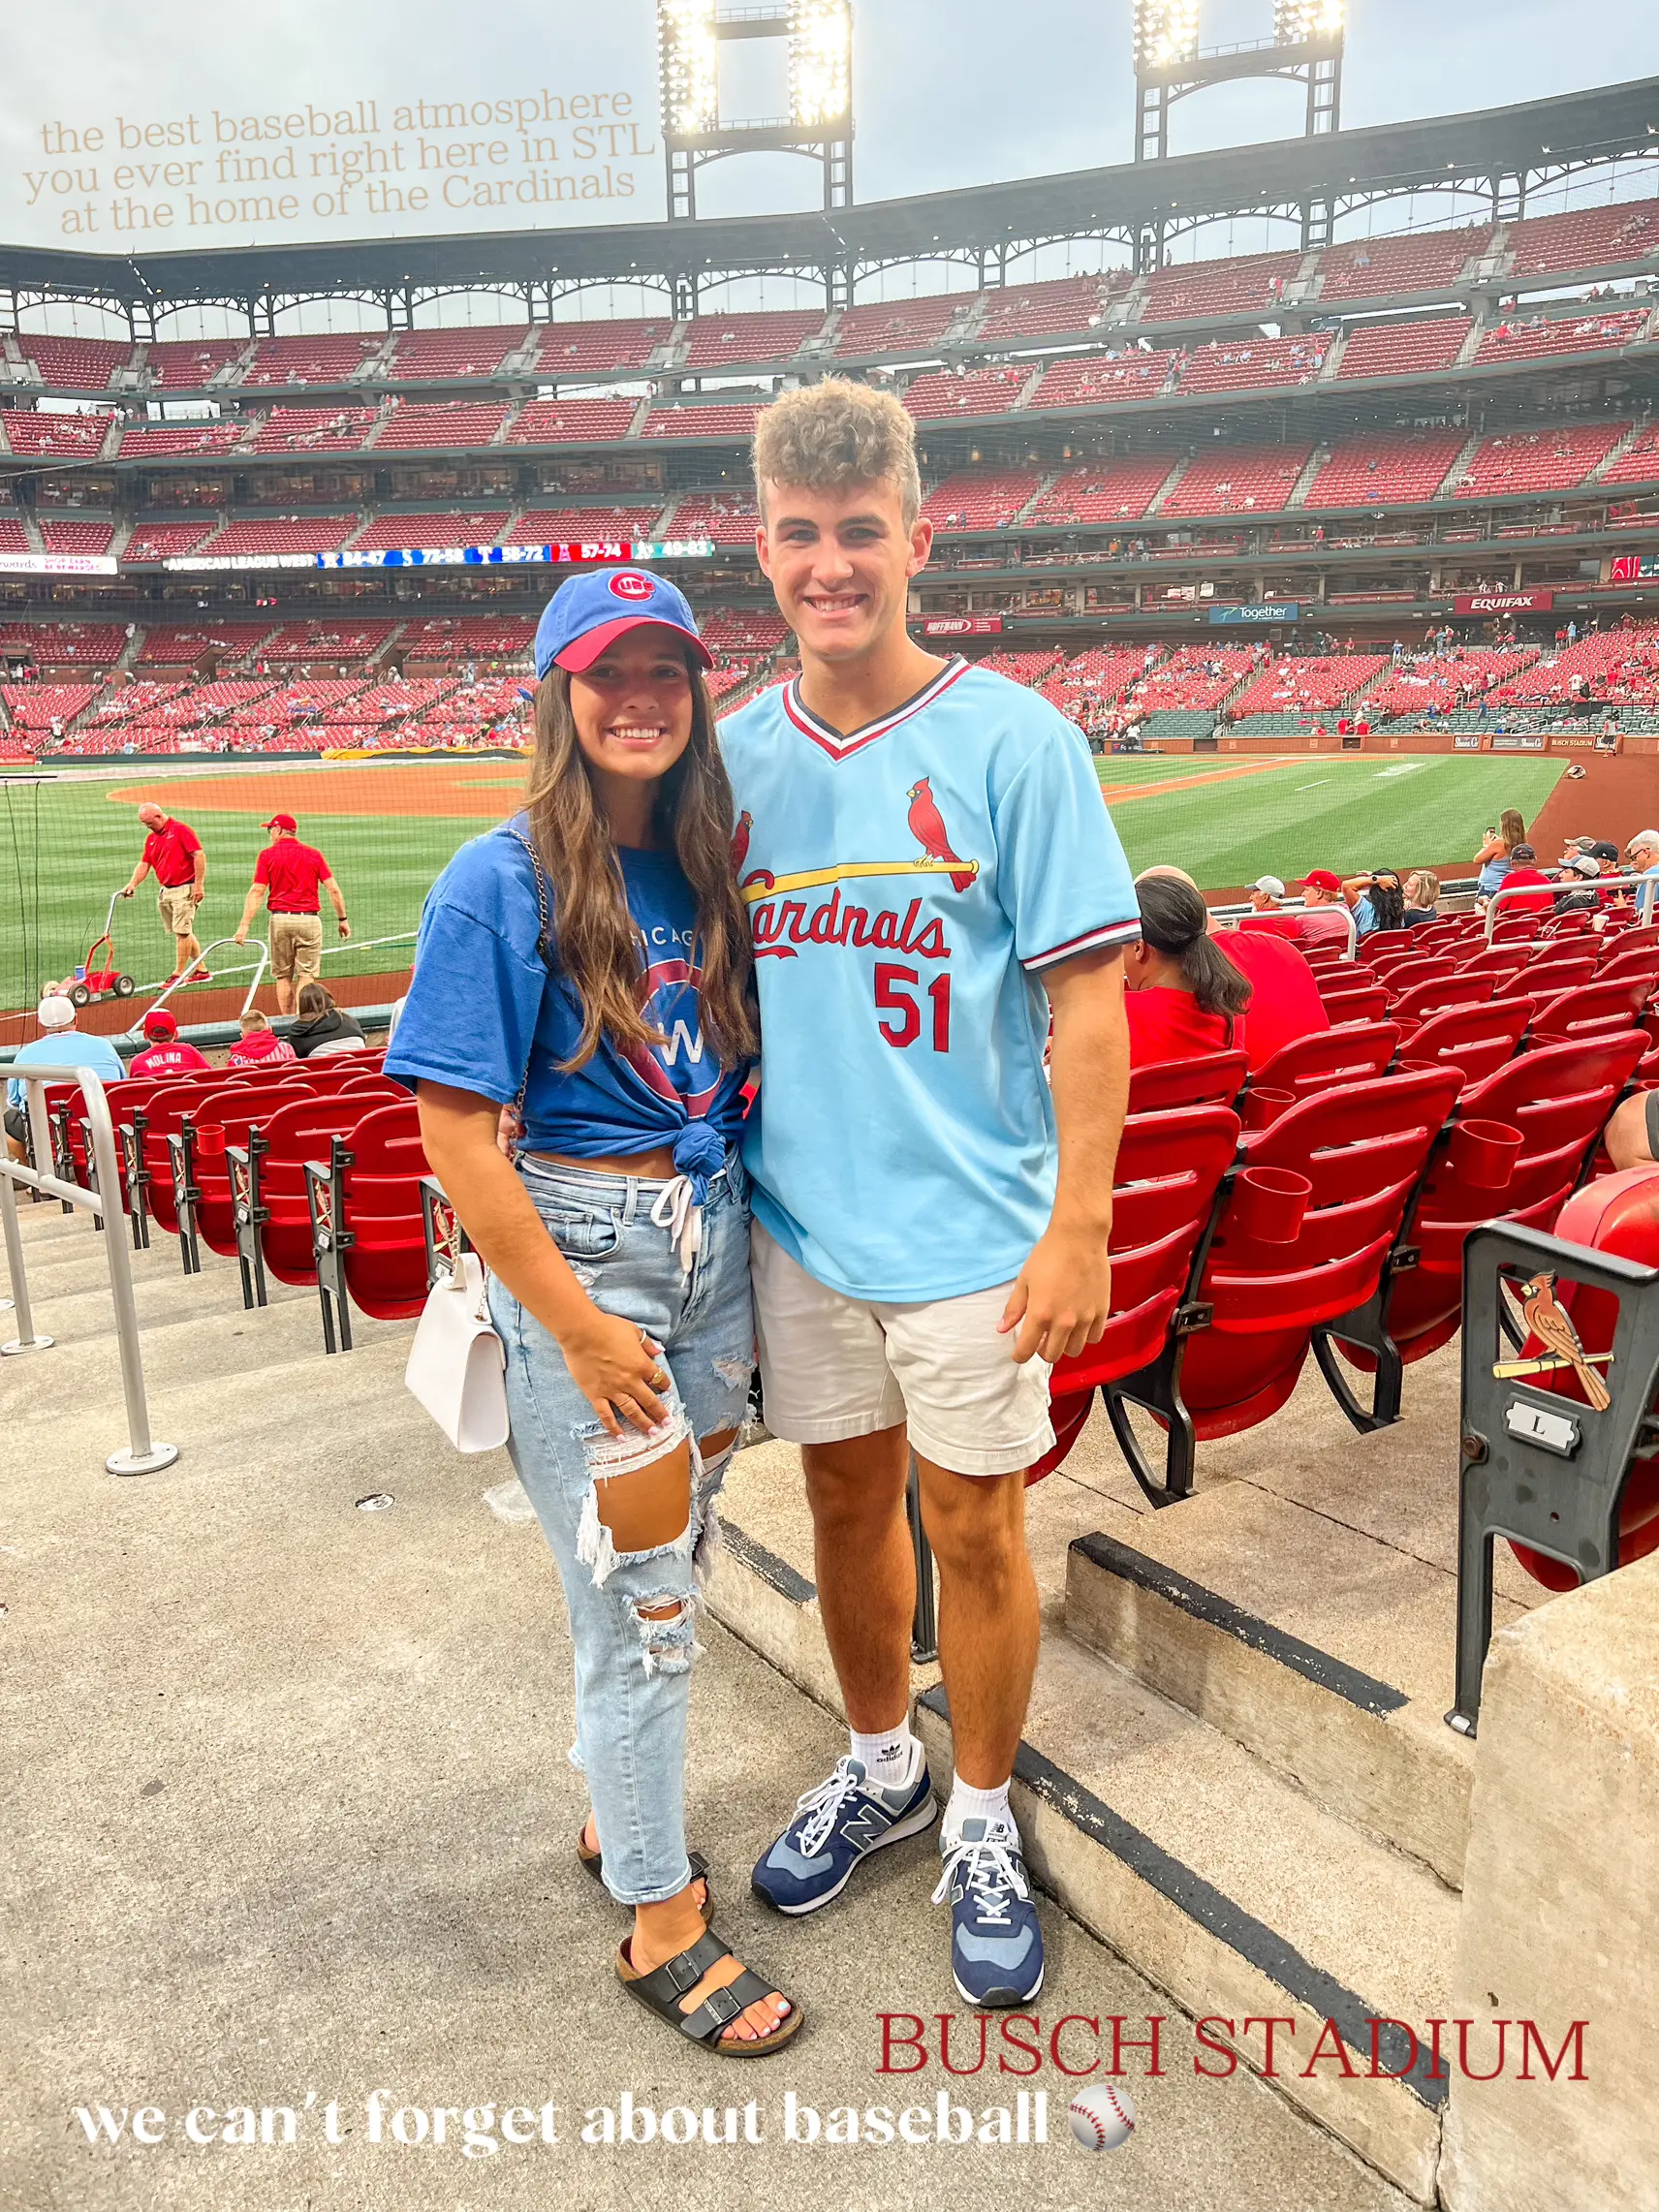  A man and a woman are posing for a picture at a baseball game at the Busch Stadium.